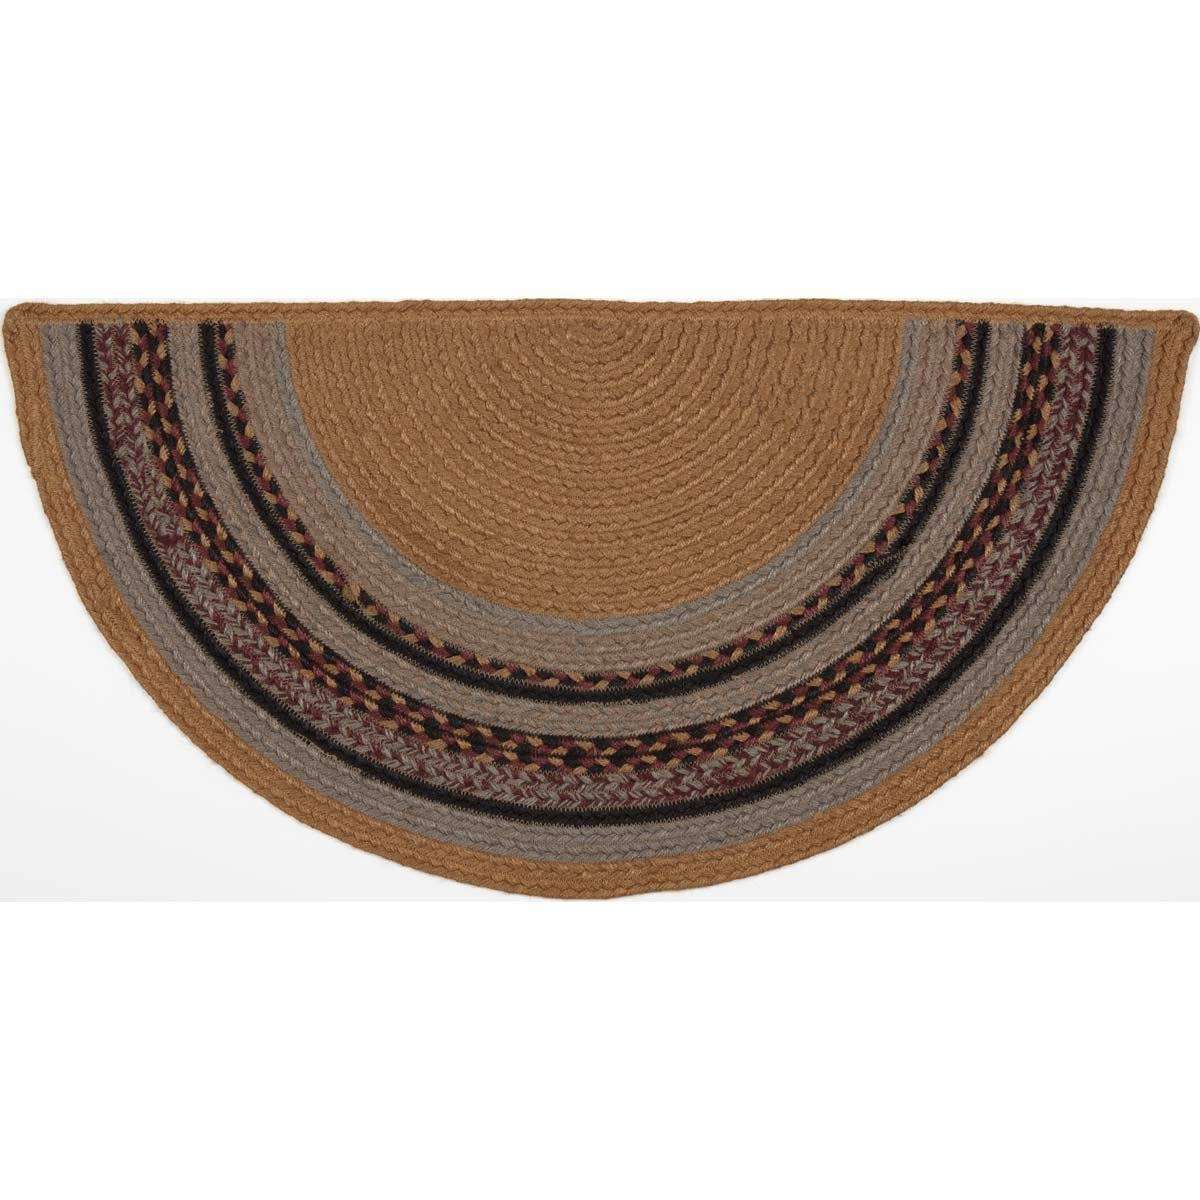 Heritage Farms Sheep Jute Braided Rug Oval/Half Circle rugs VHC Brands 